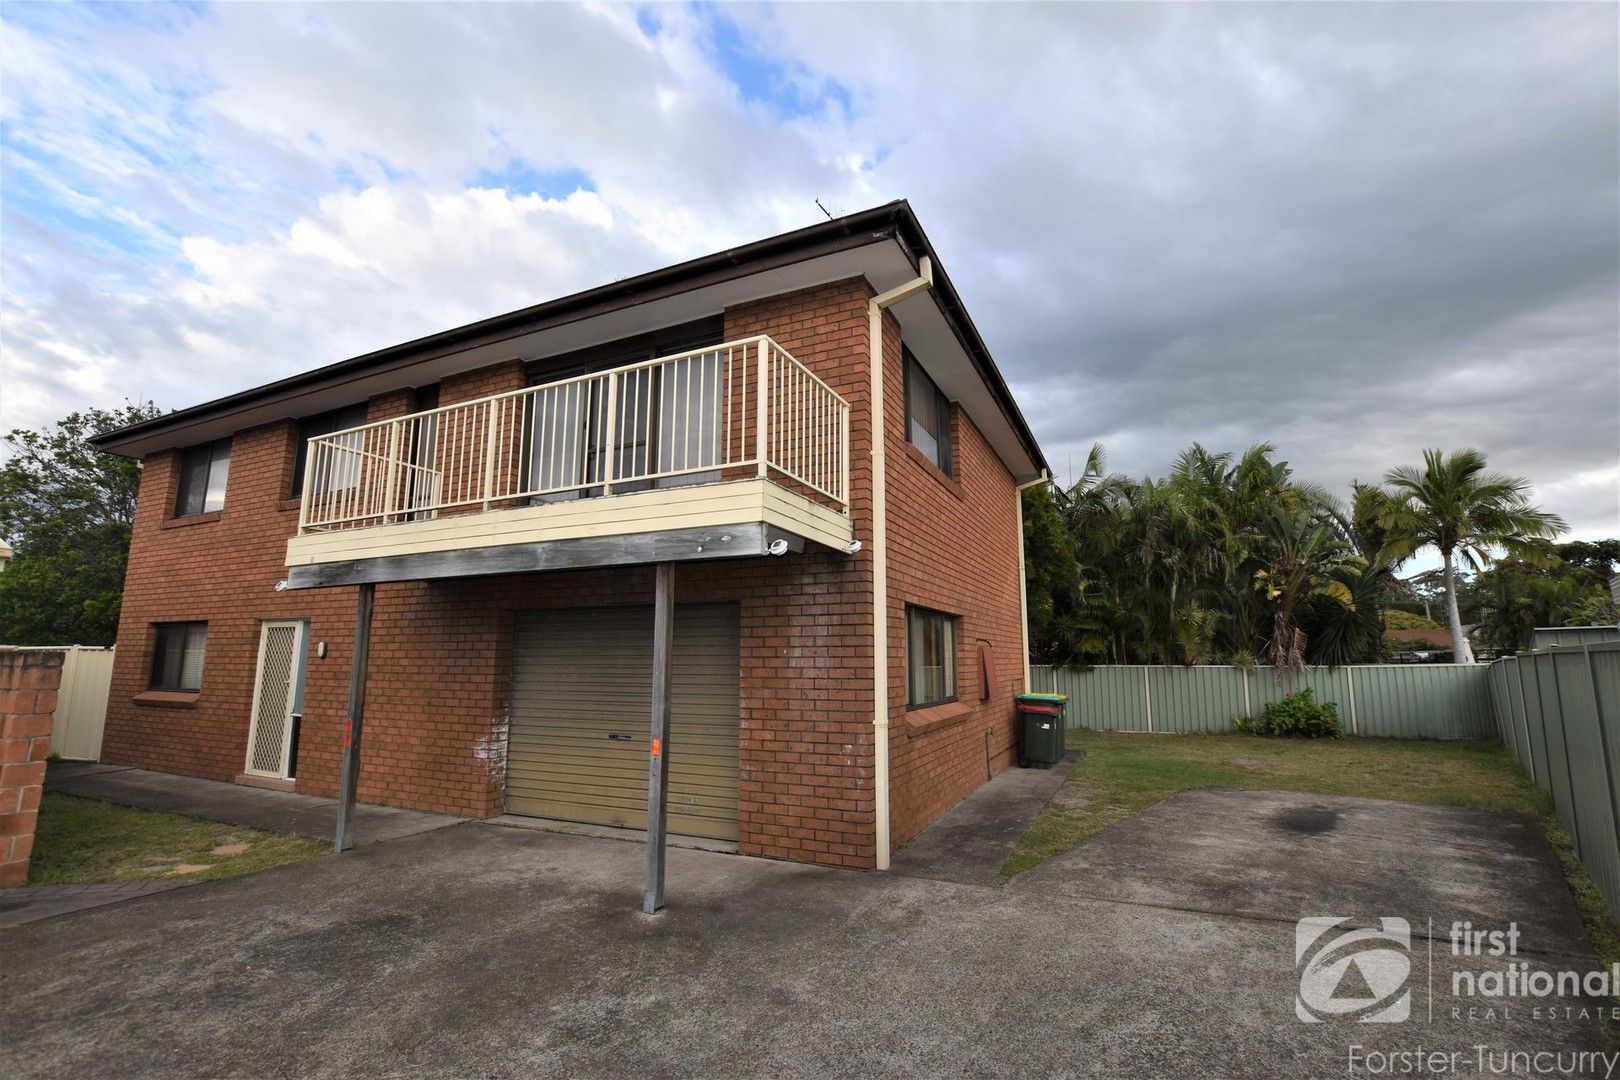 3 bedrooms House in 2/16 De Lore Crescent TUNCURRY NSW, 2428